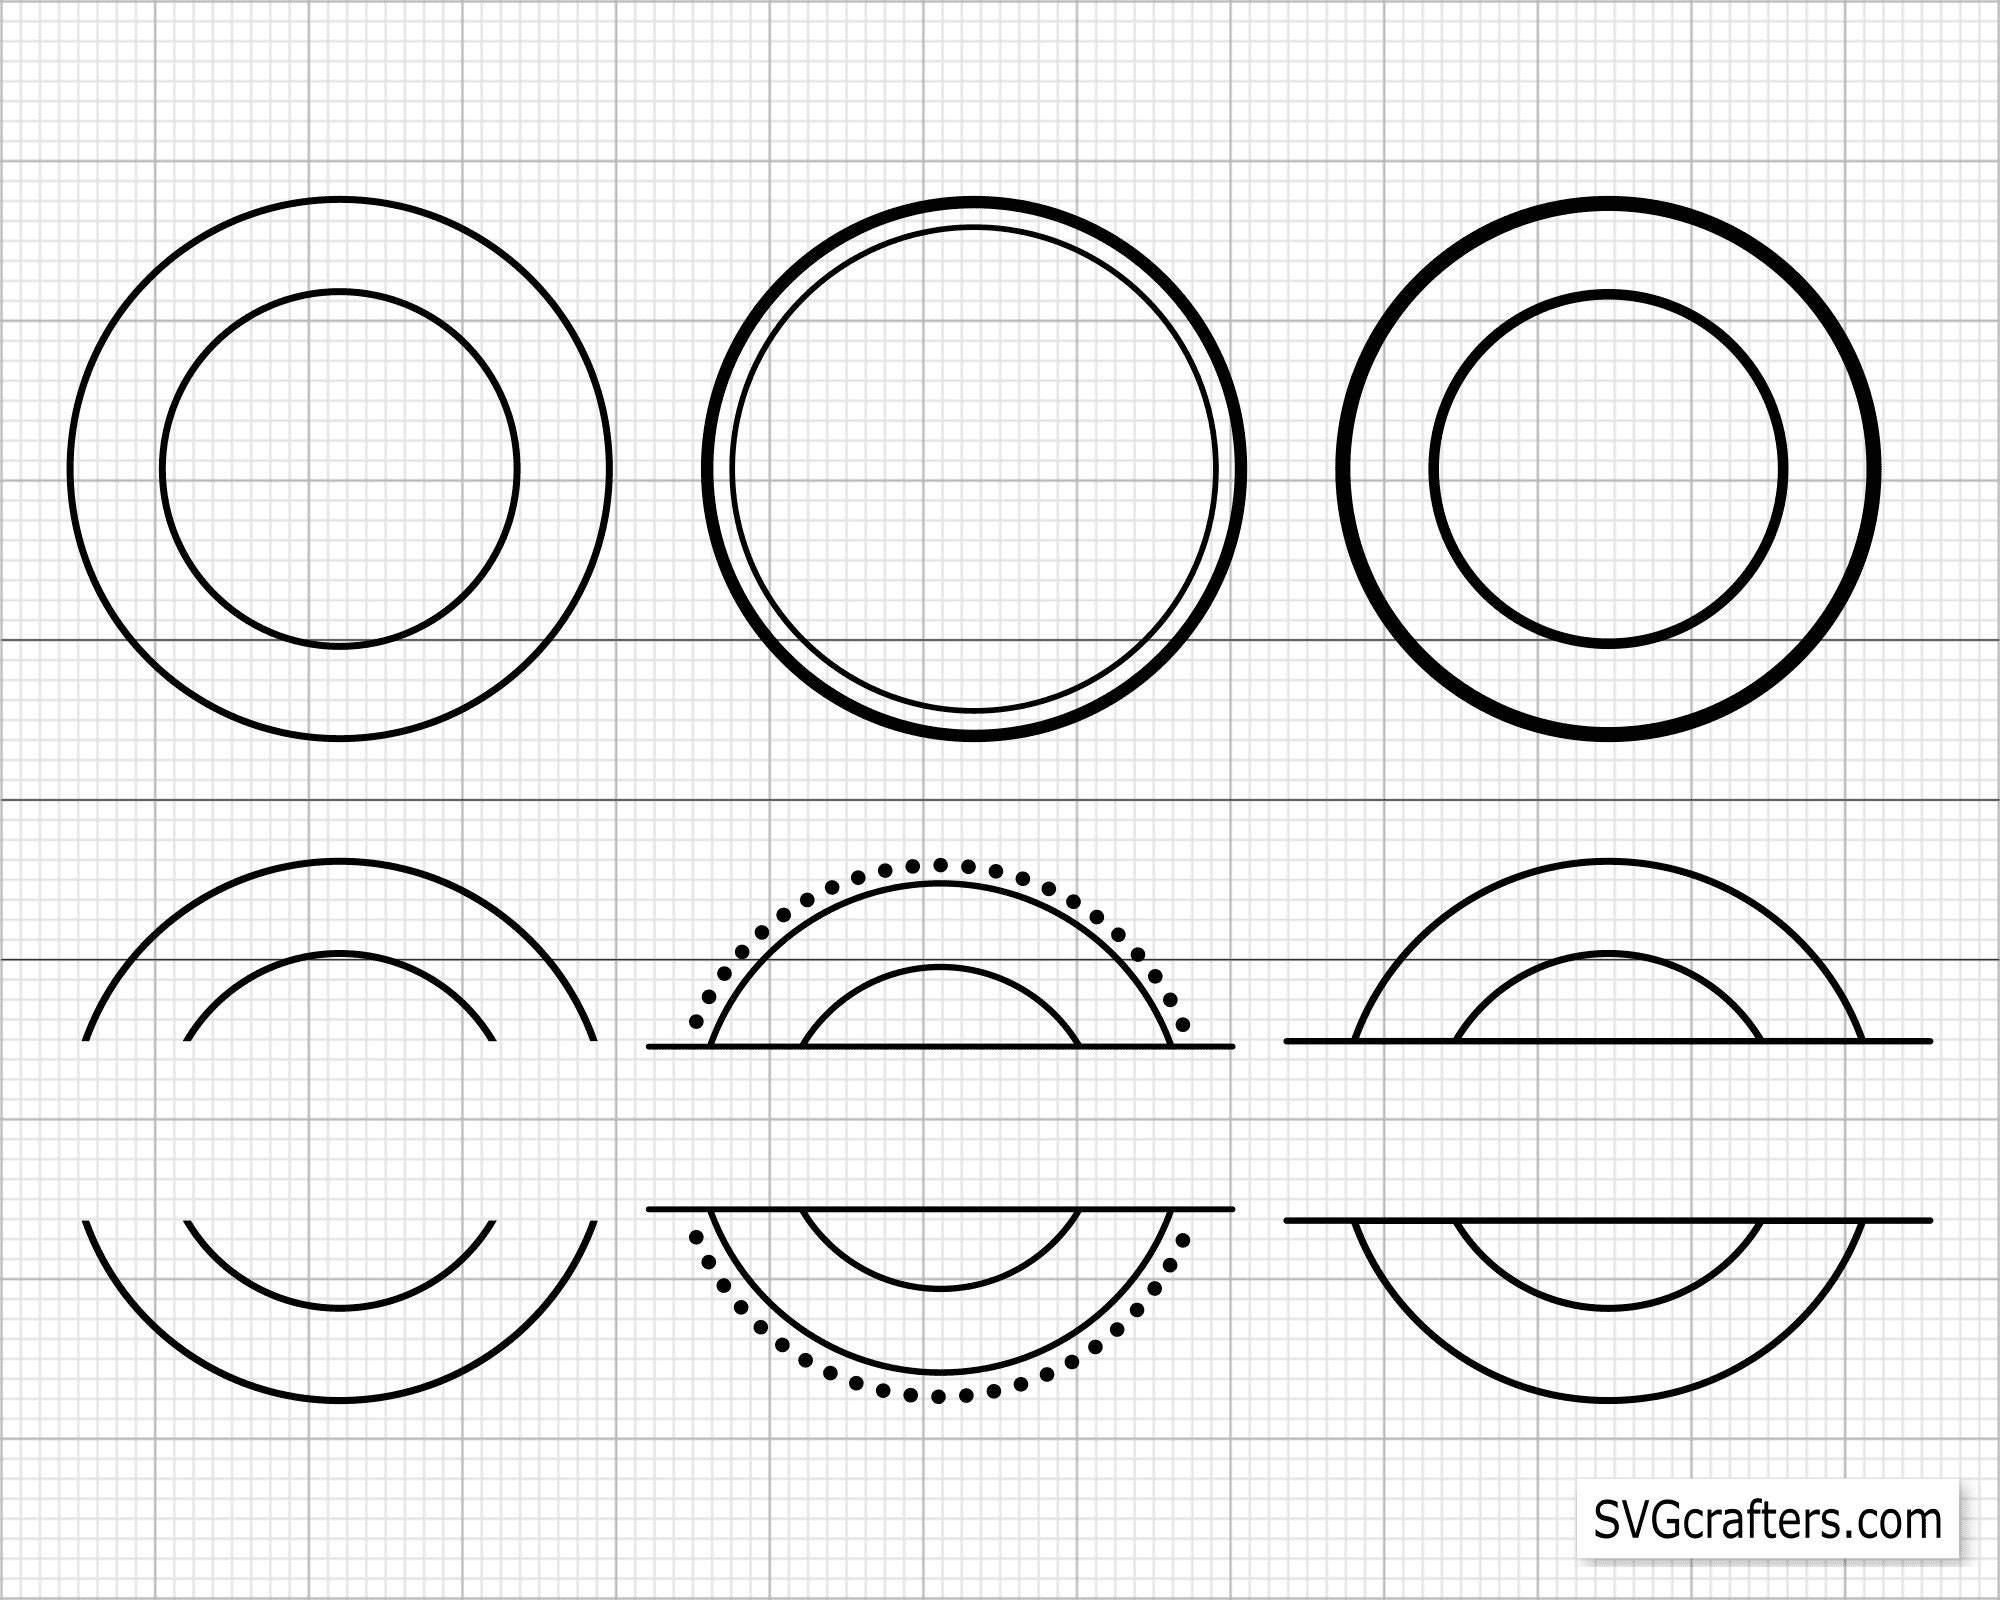 SVG DXF Circle Arrow Monogram Frame Cut File - Rivermill Embroidery